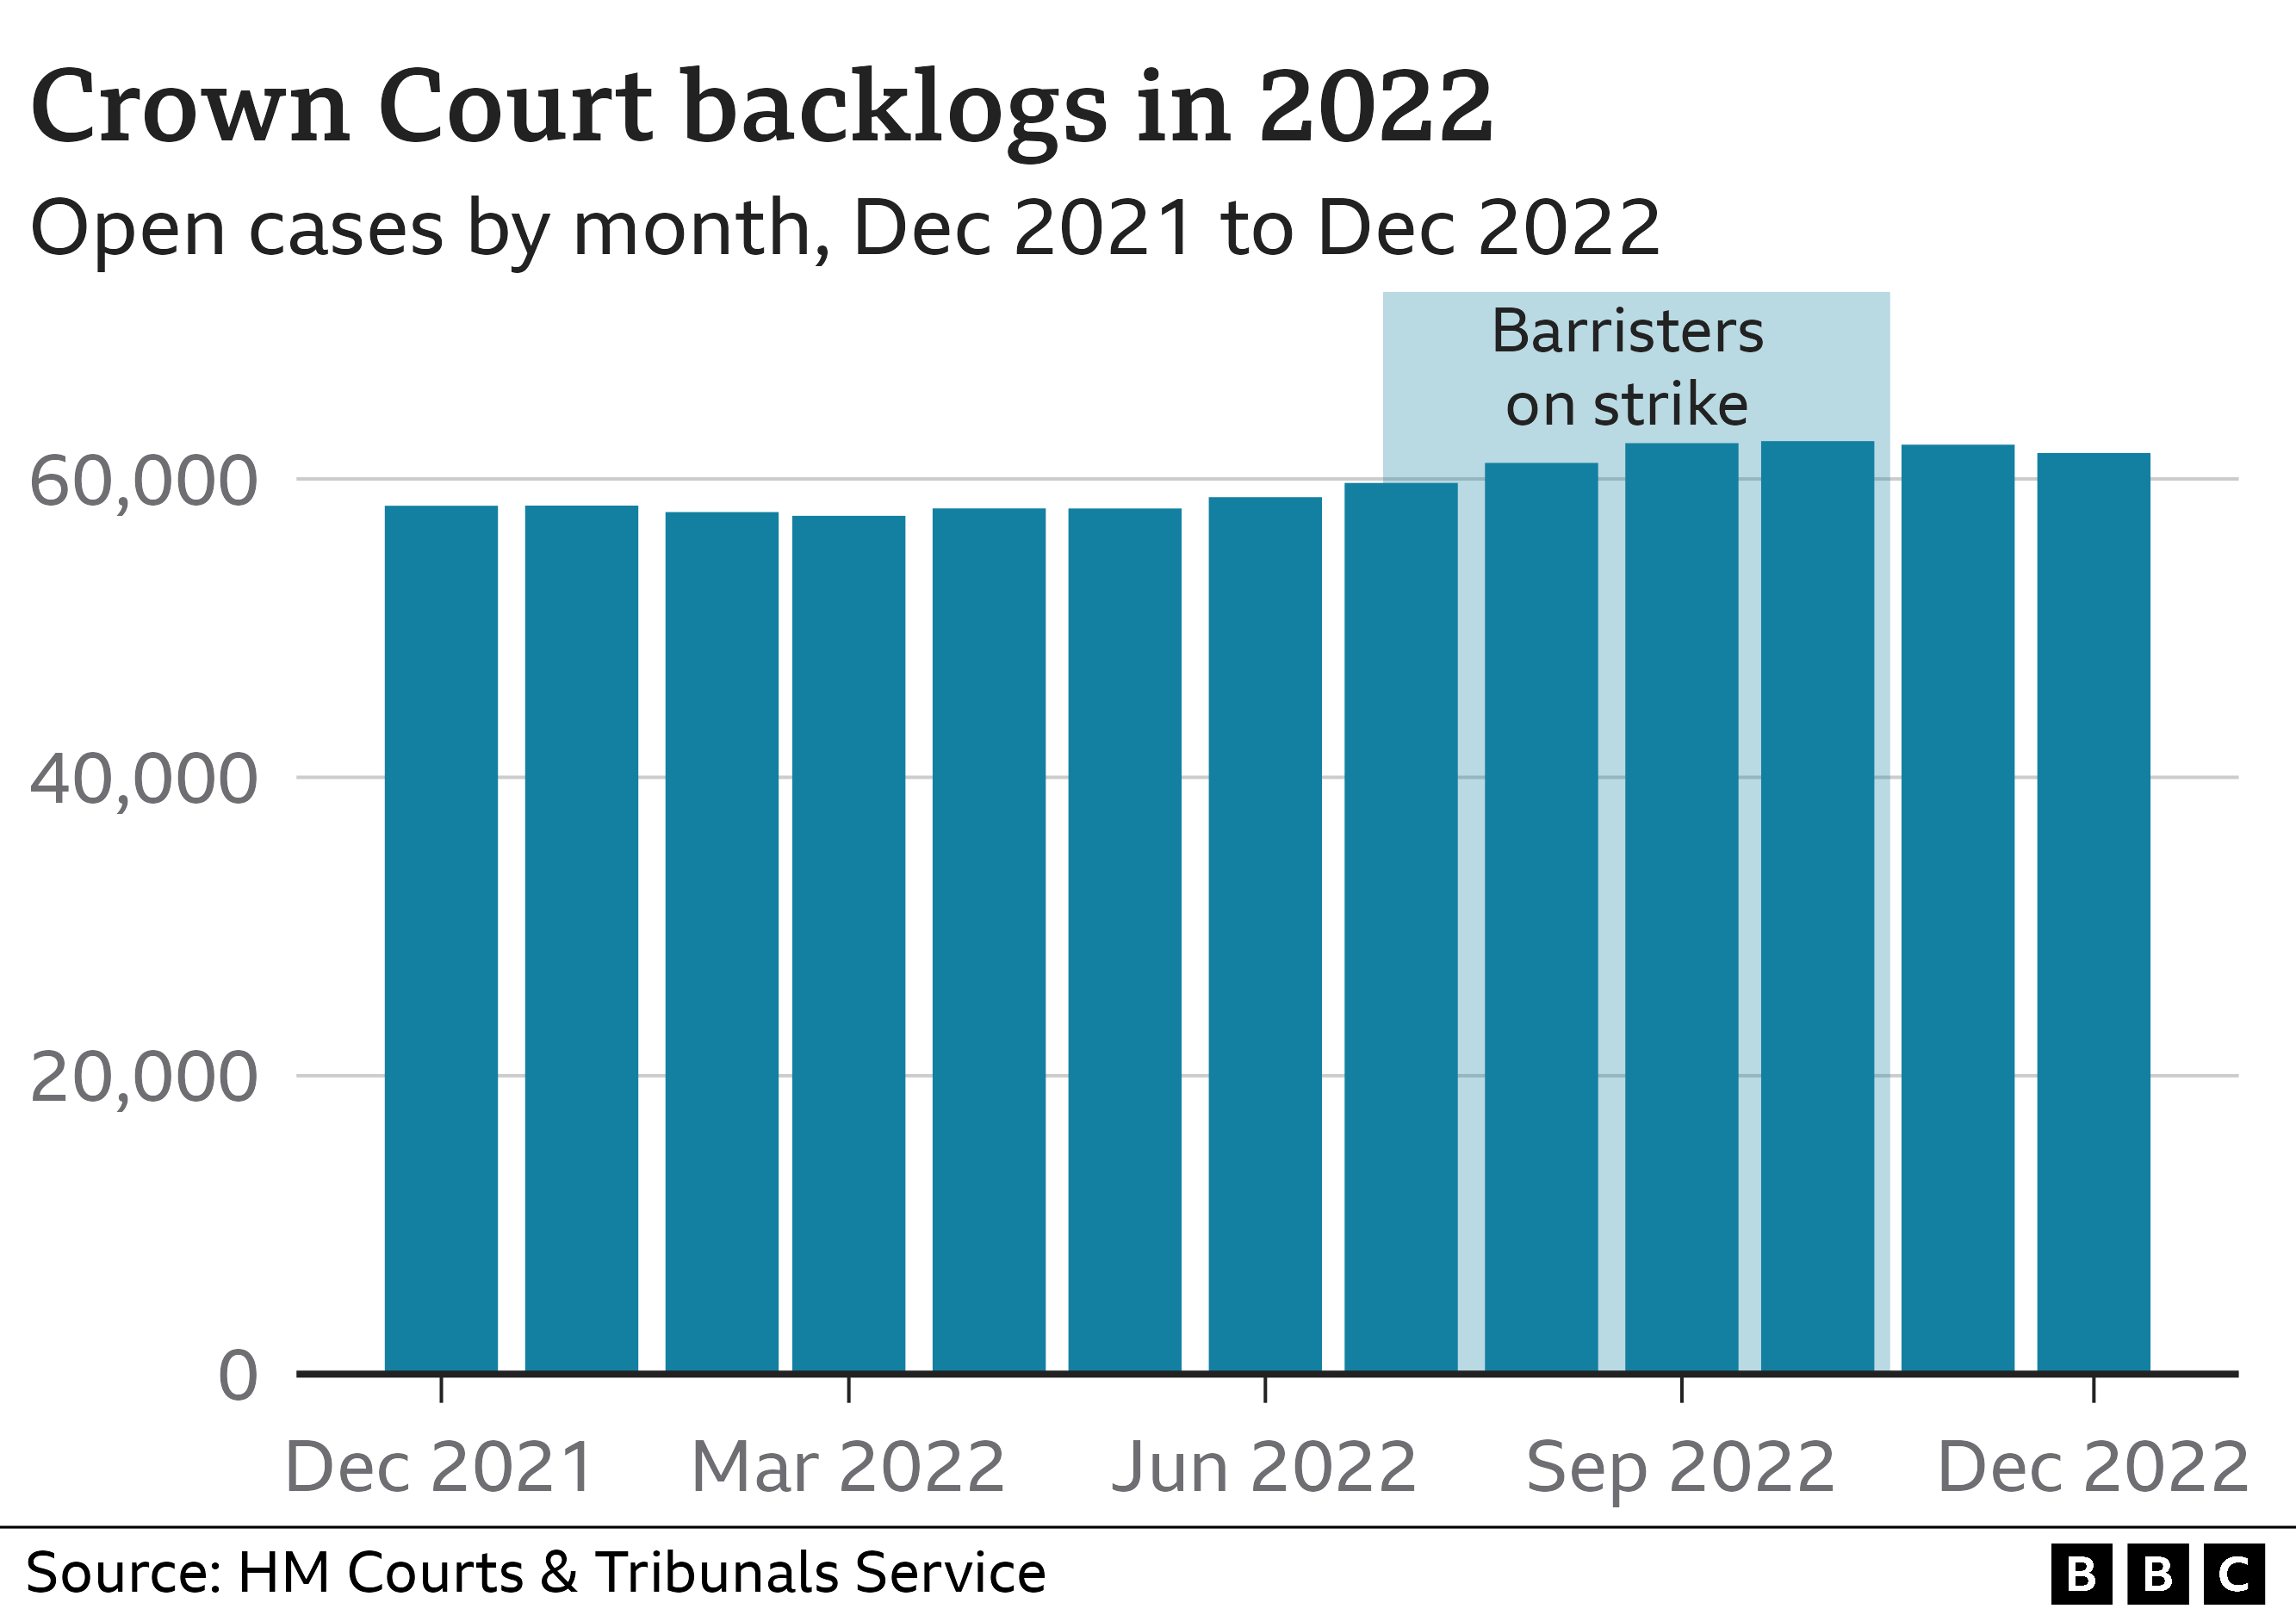 Chart showing court backlogs